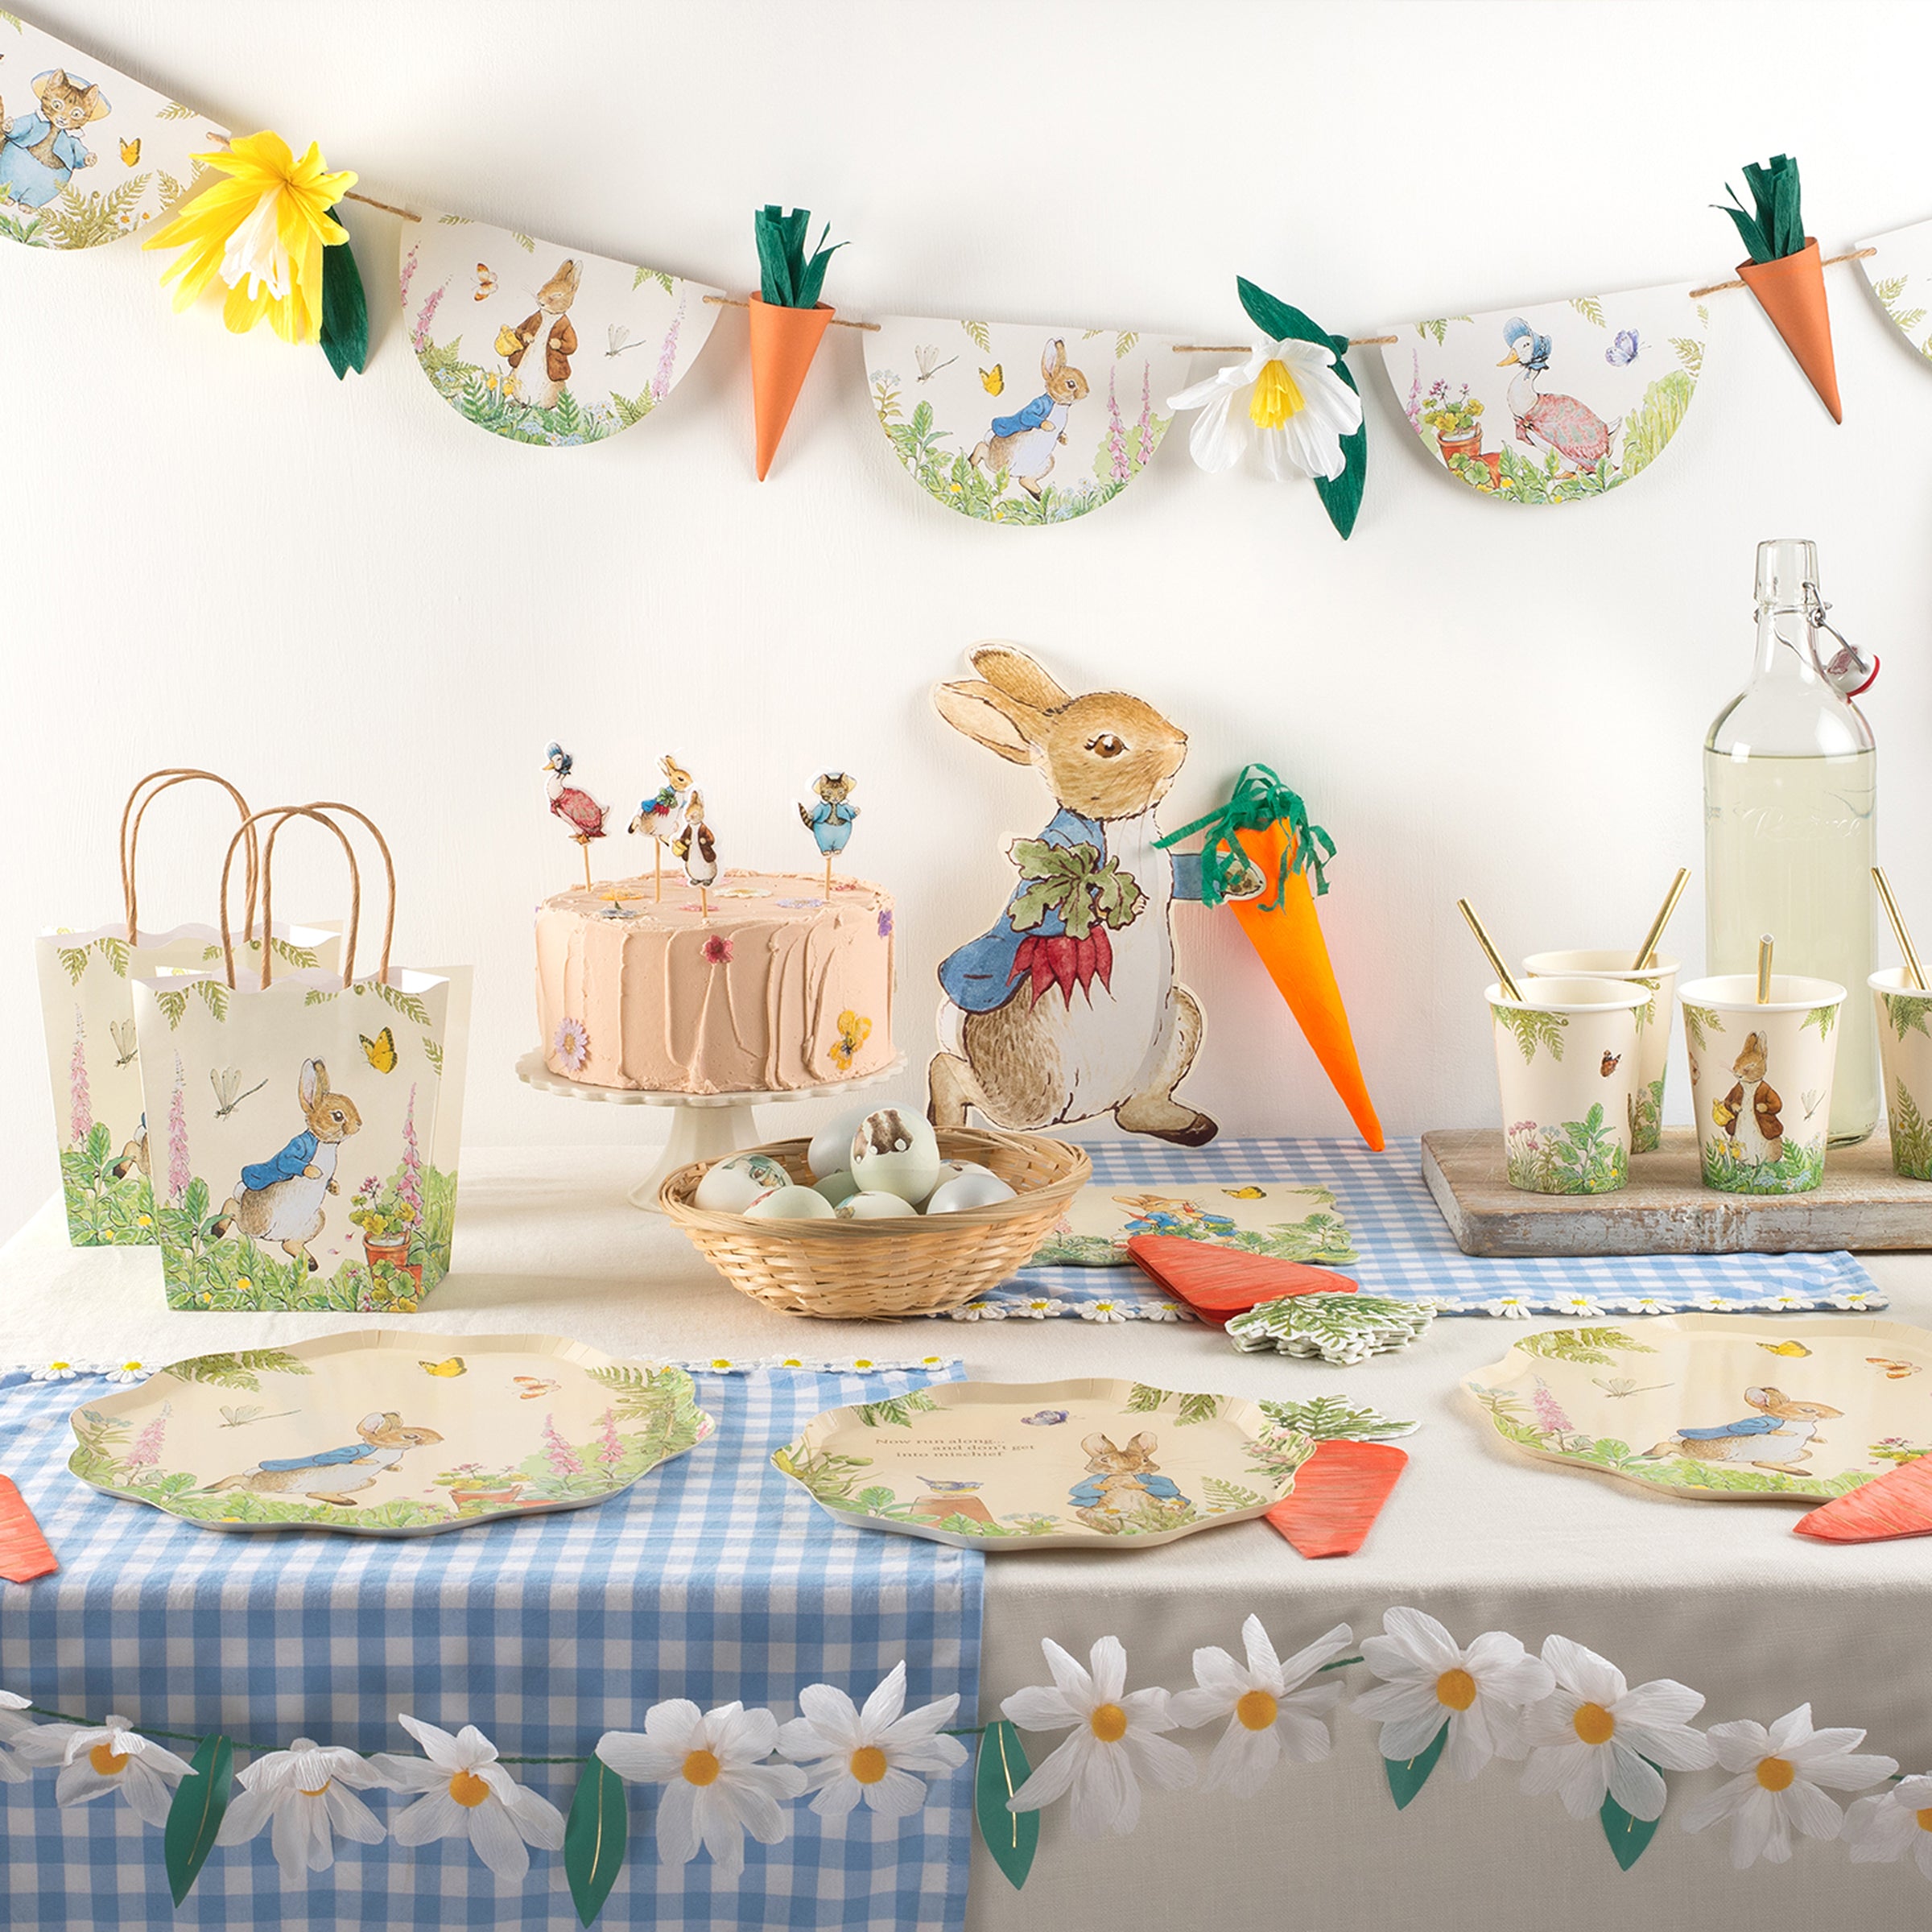 If you're having a Peter Rabbit party or need Easter party decoration ideas then you'll love our Peter Rabbit garland.